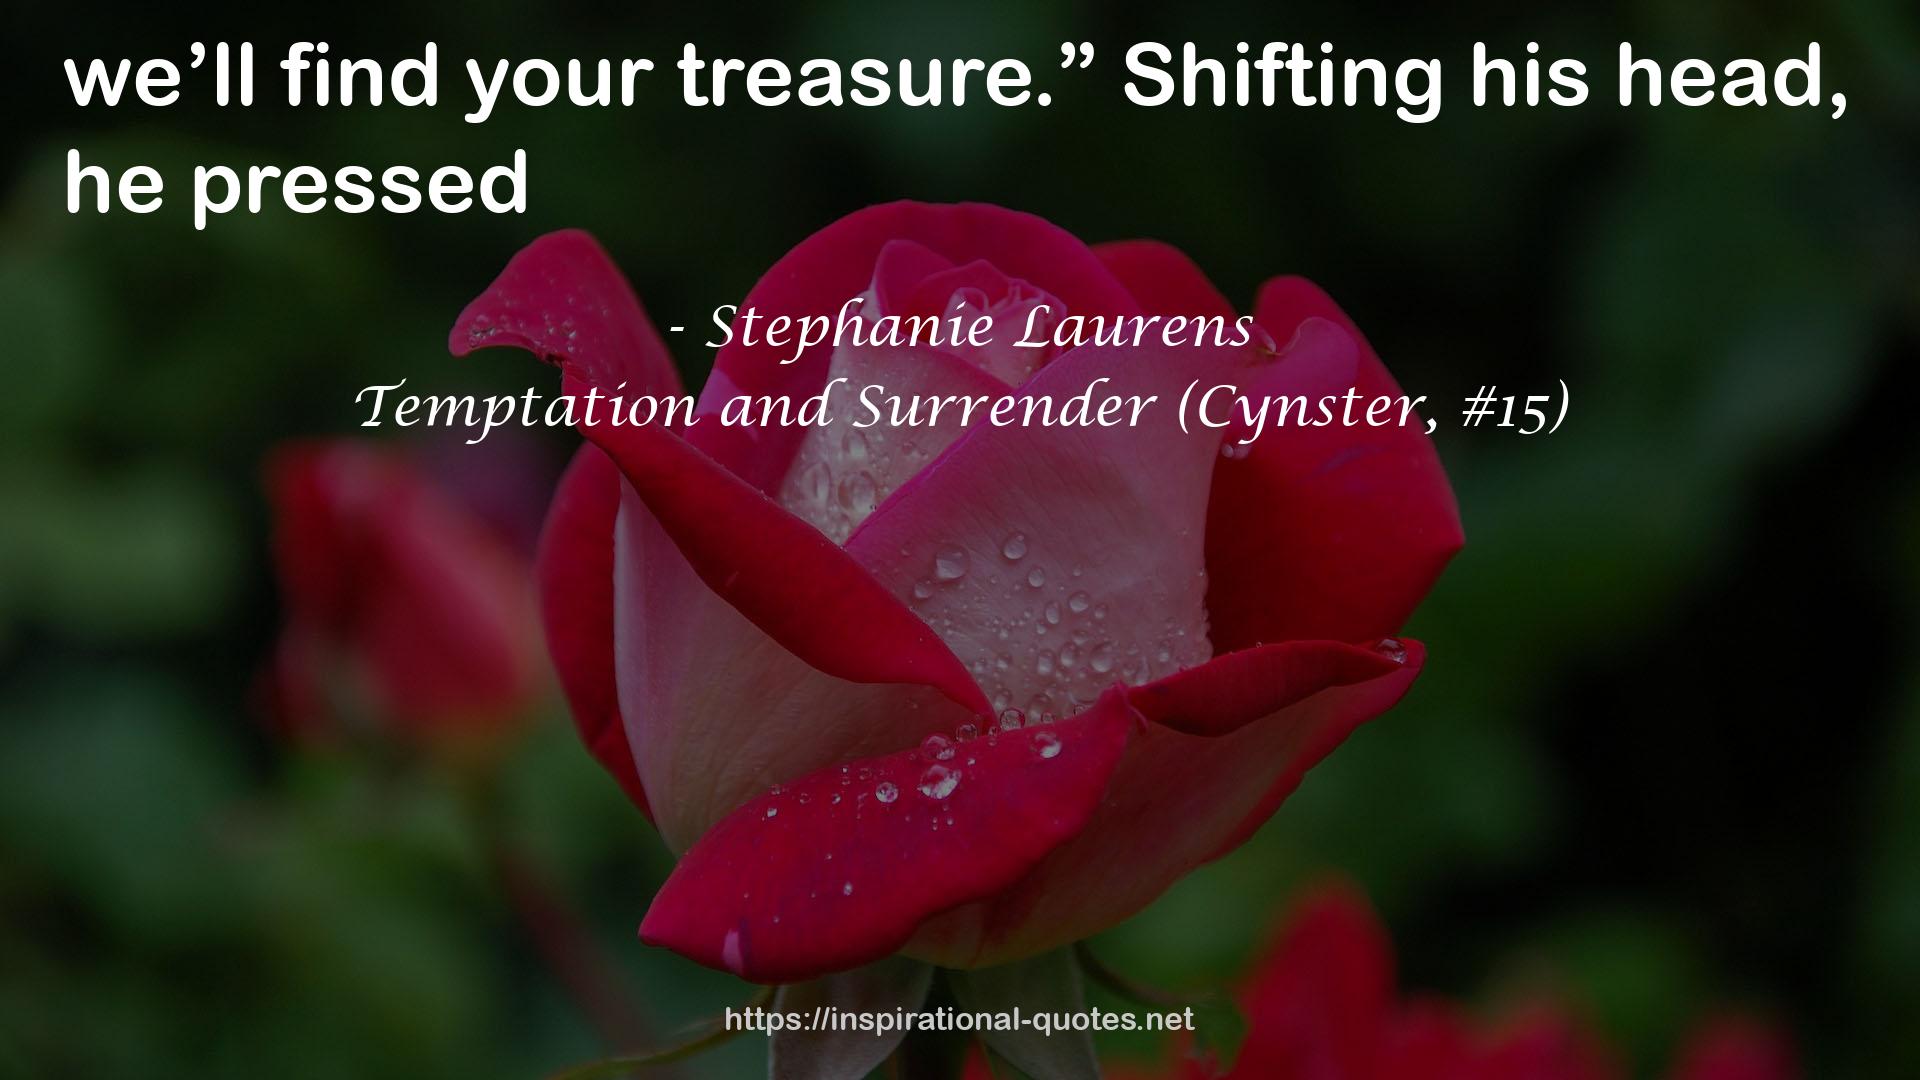 Temptation and Surrender (Cynster, #15) QUOTES